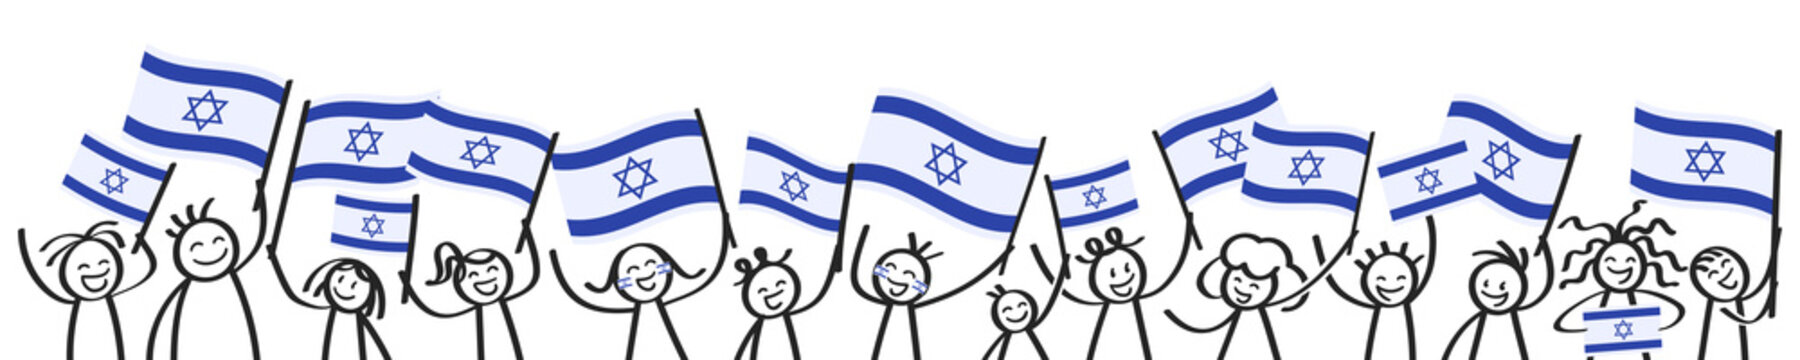 Cheering crowd of happy stick figures with Israeli national flags, smiling Israel supporters, sports fans isolated on white background